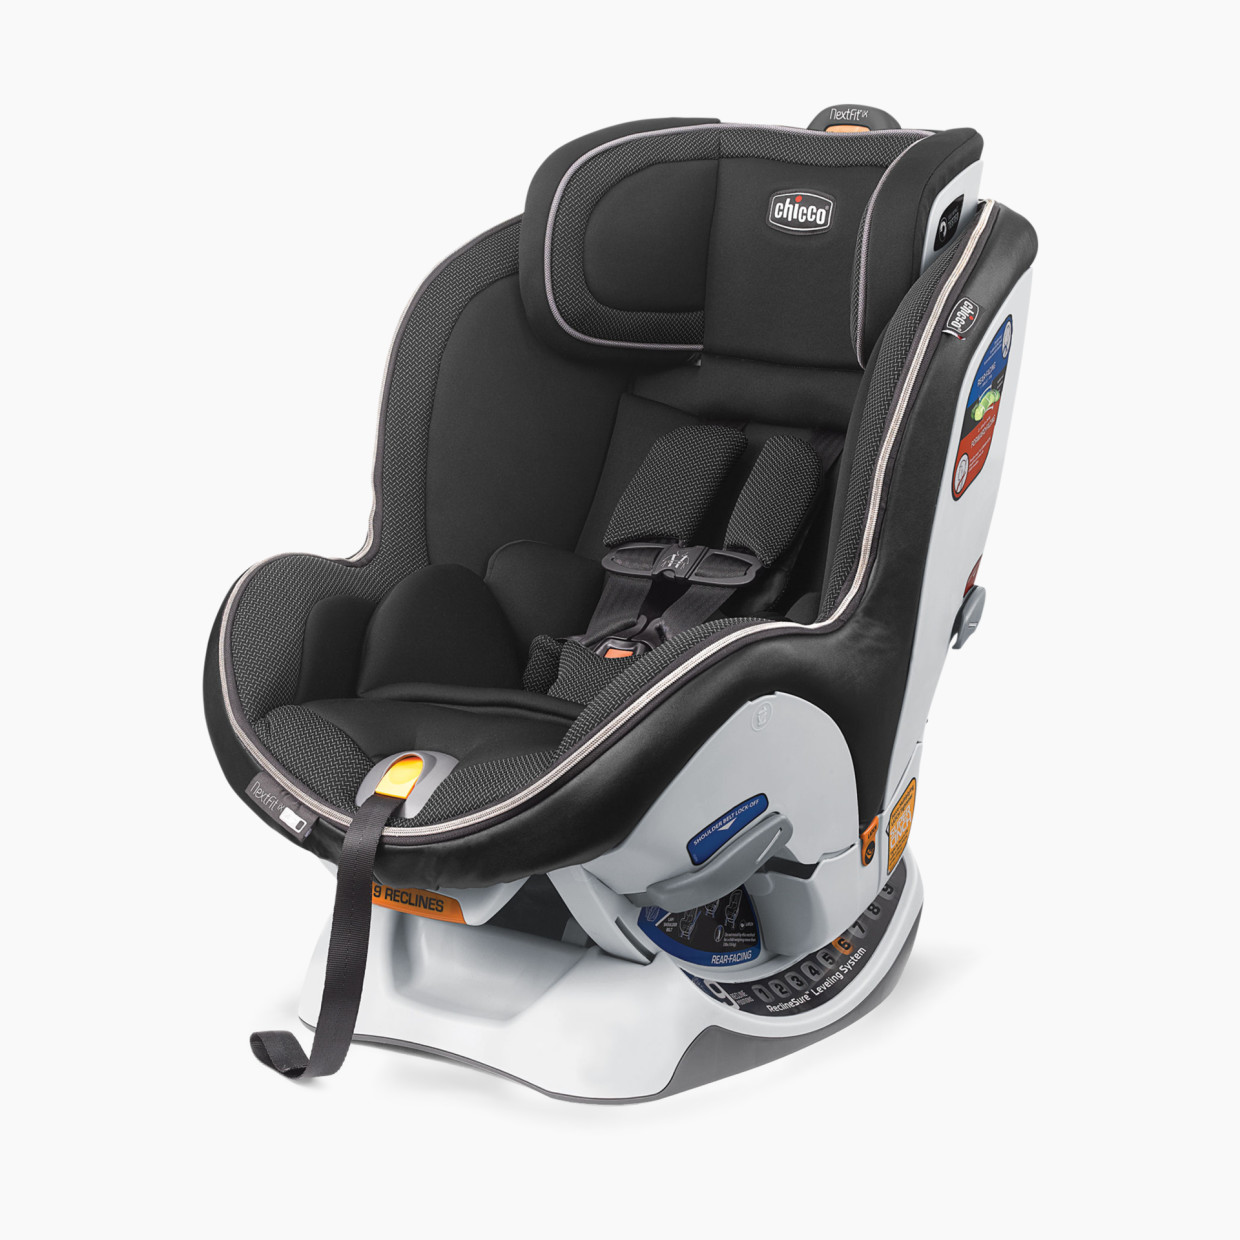 Chicco NextFit iX Zip Convertible Car Seat - Traction.